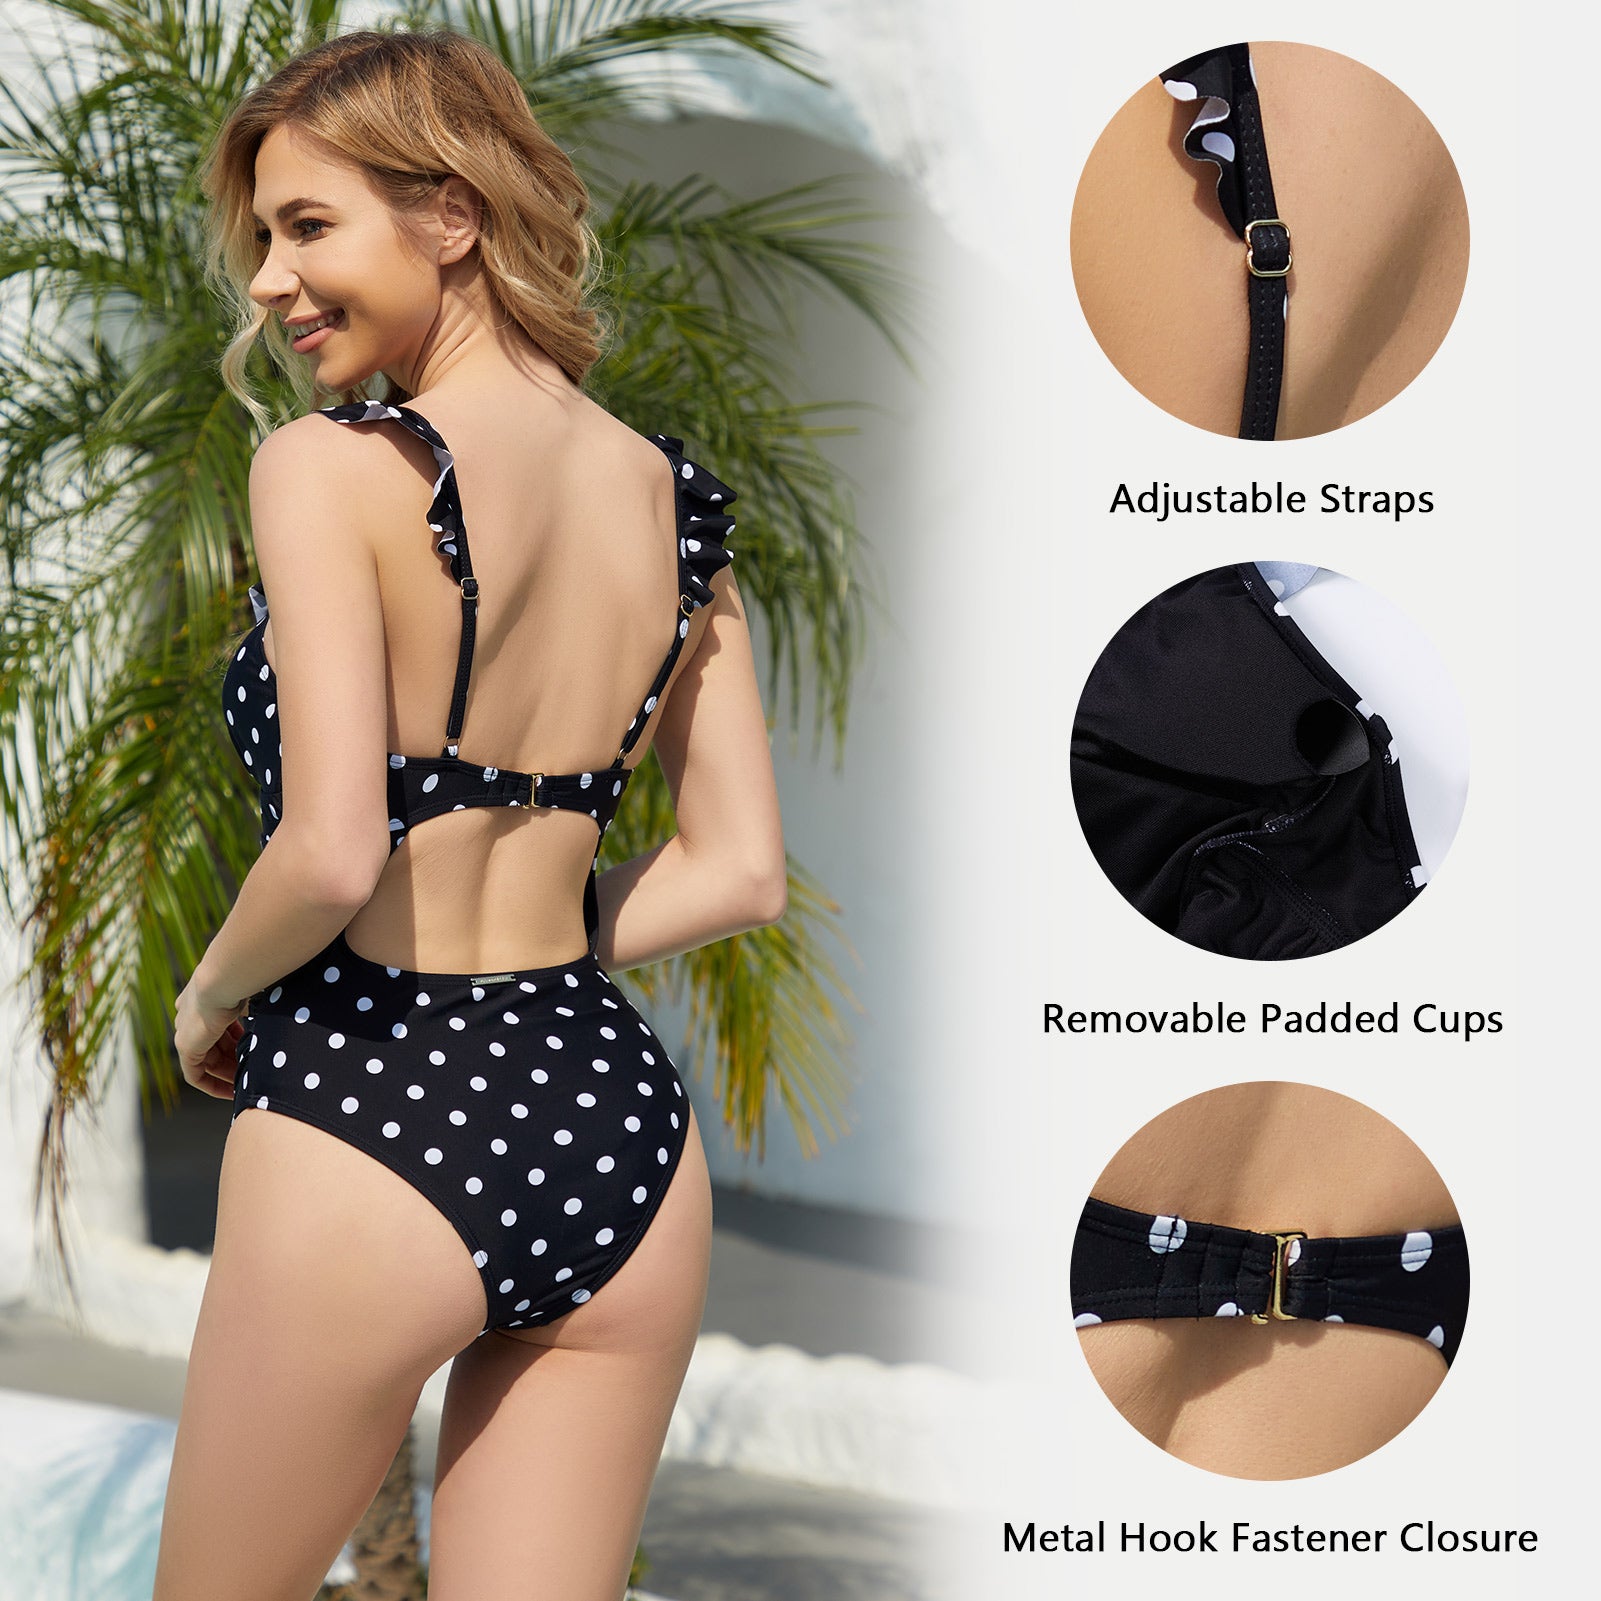 Tummy Control Bathing Suit with Ruffled Strap